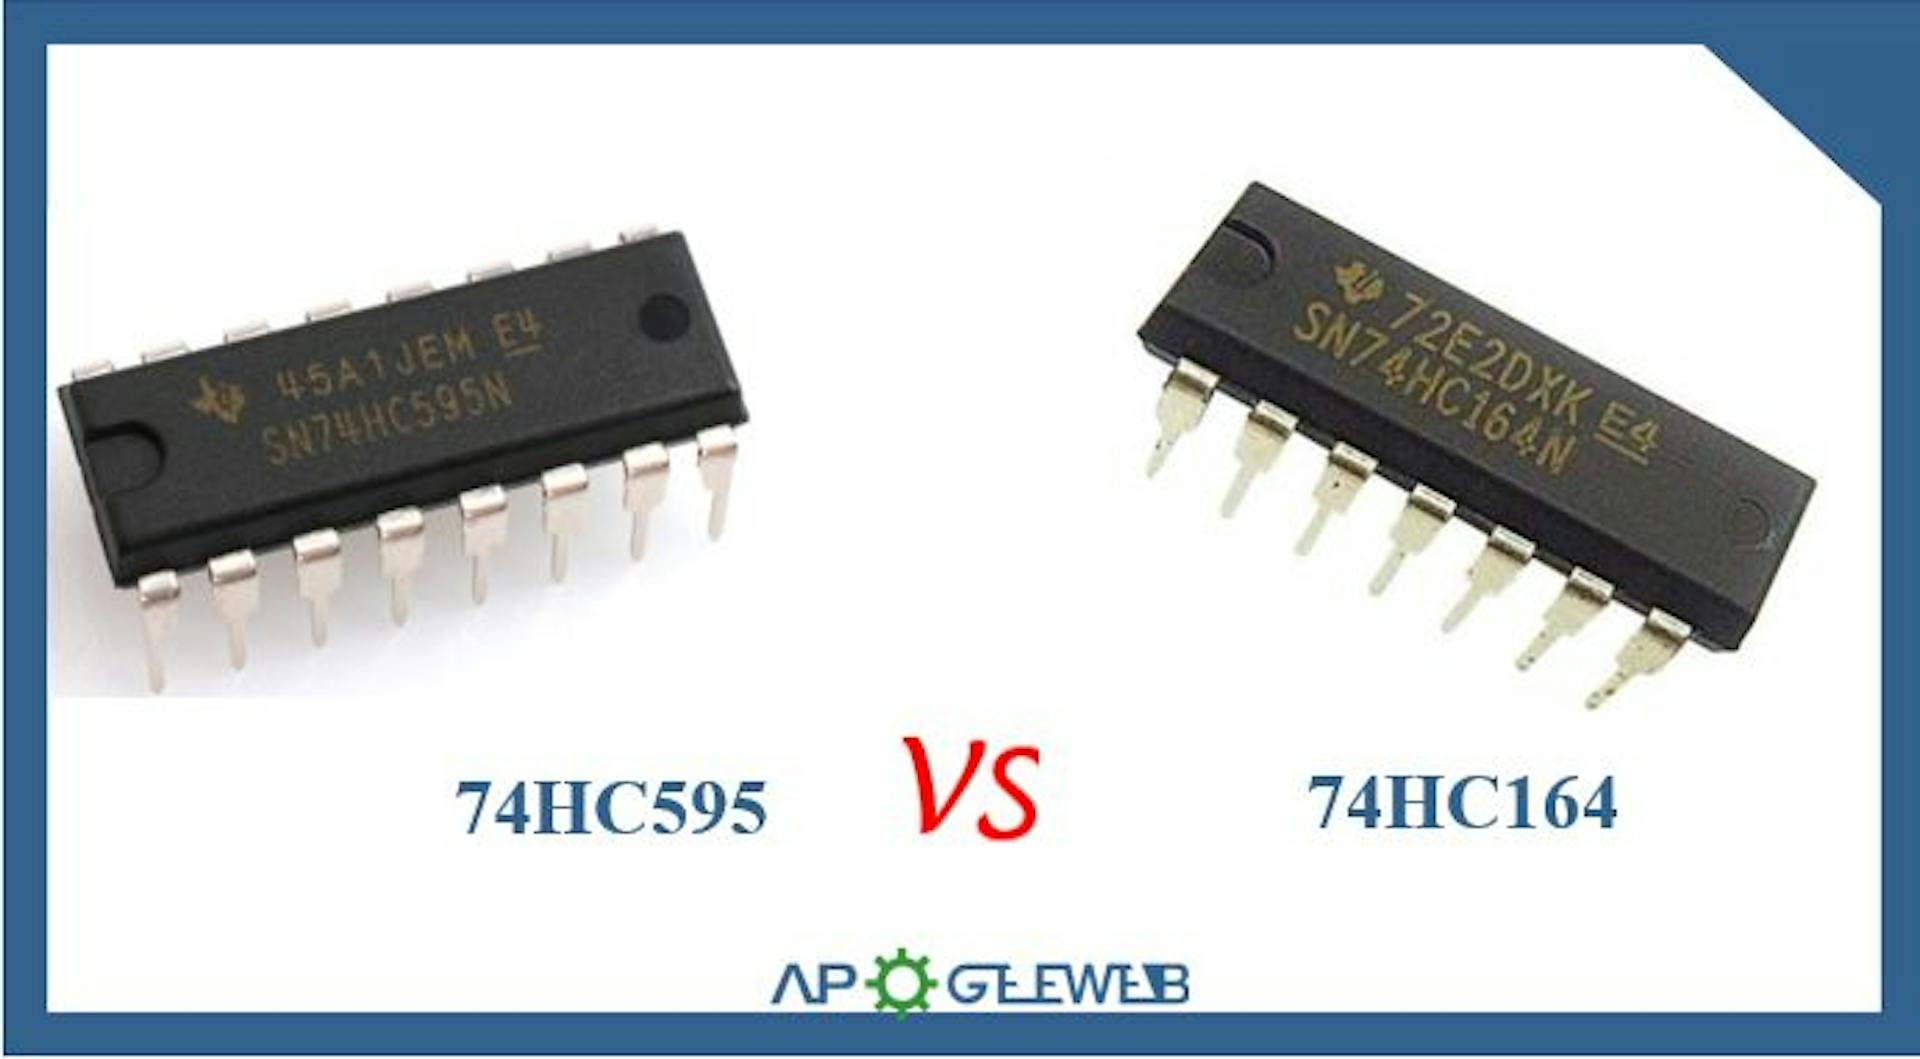 featured image - What's the difference between 74HC595 and 74HC164?